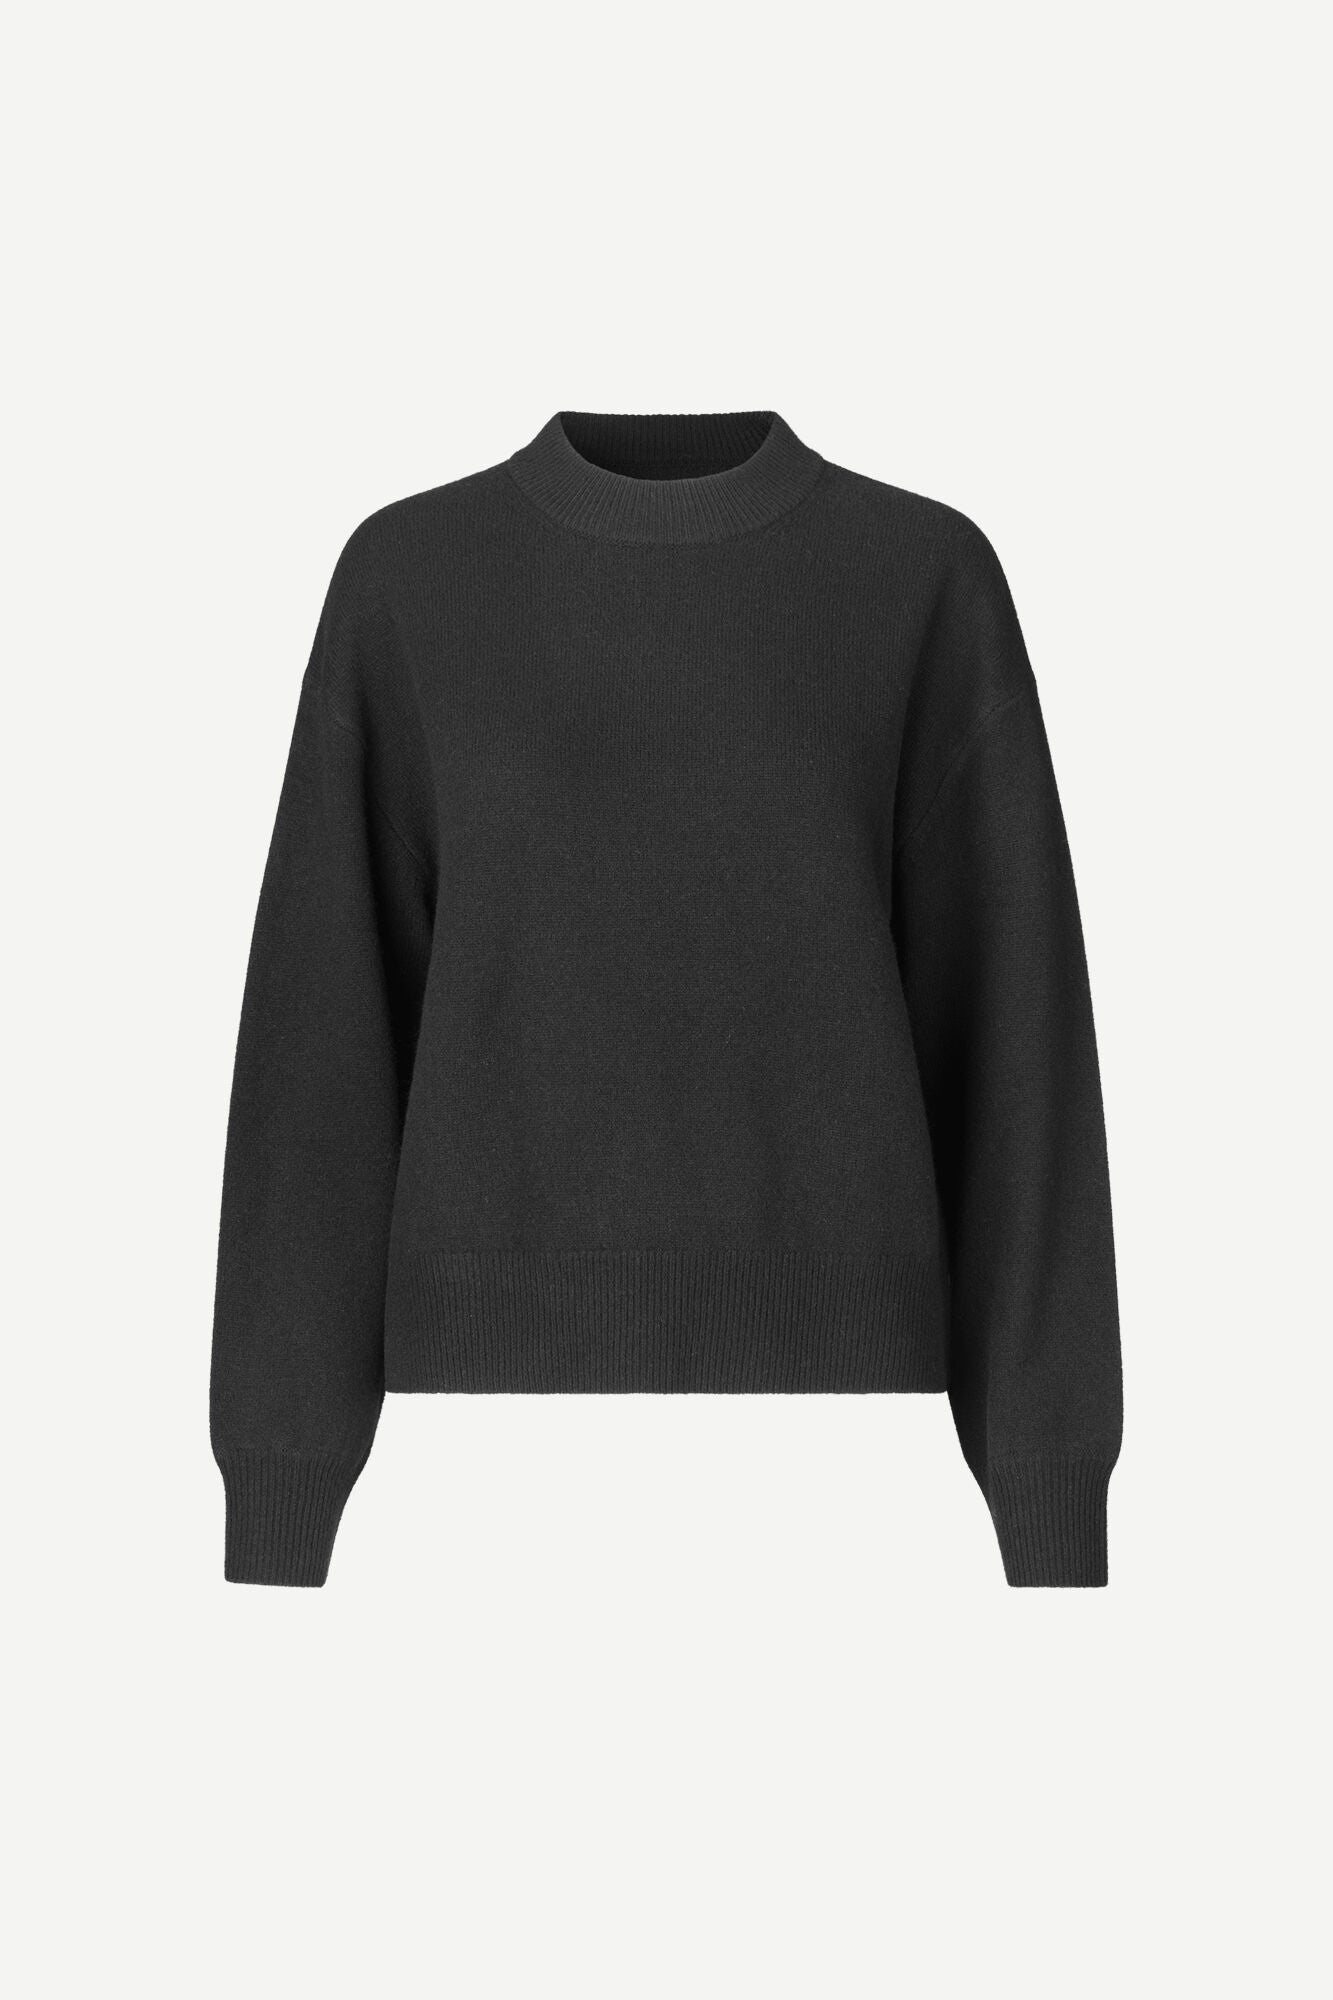 KNITTED CREW NECK SWEATER IN BLACK BLUE